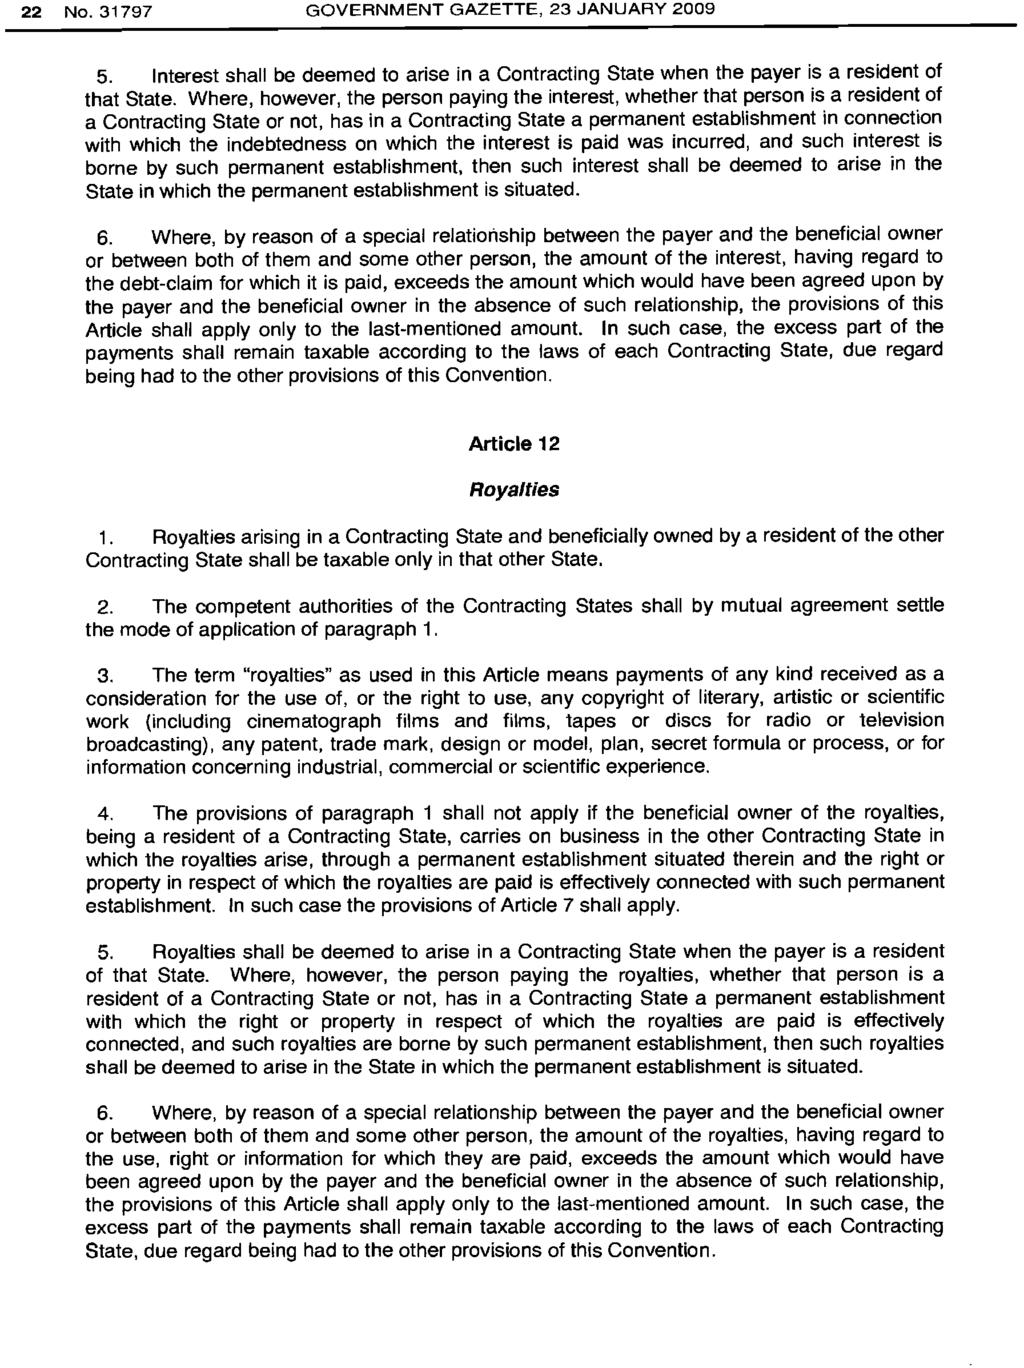 22 No. 31797 GOVERNMENT GAZETTE, 23 JANUARY 2009 5. Interest shall be deemed to arise in a Contracting State when the payer is a resident of that State.